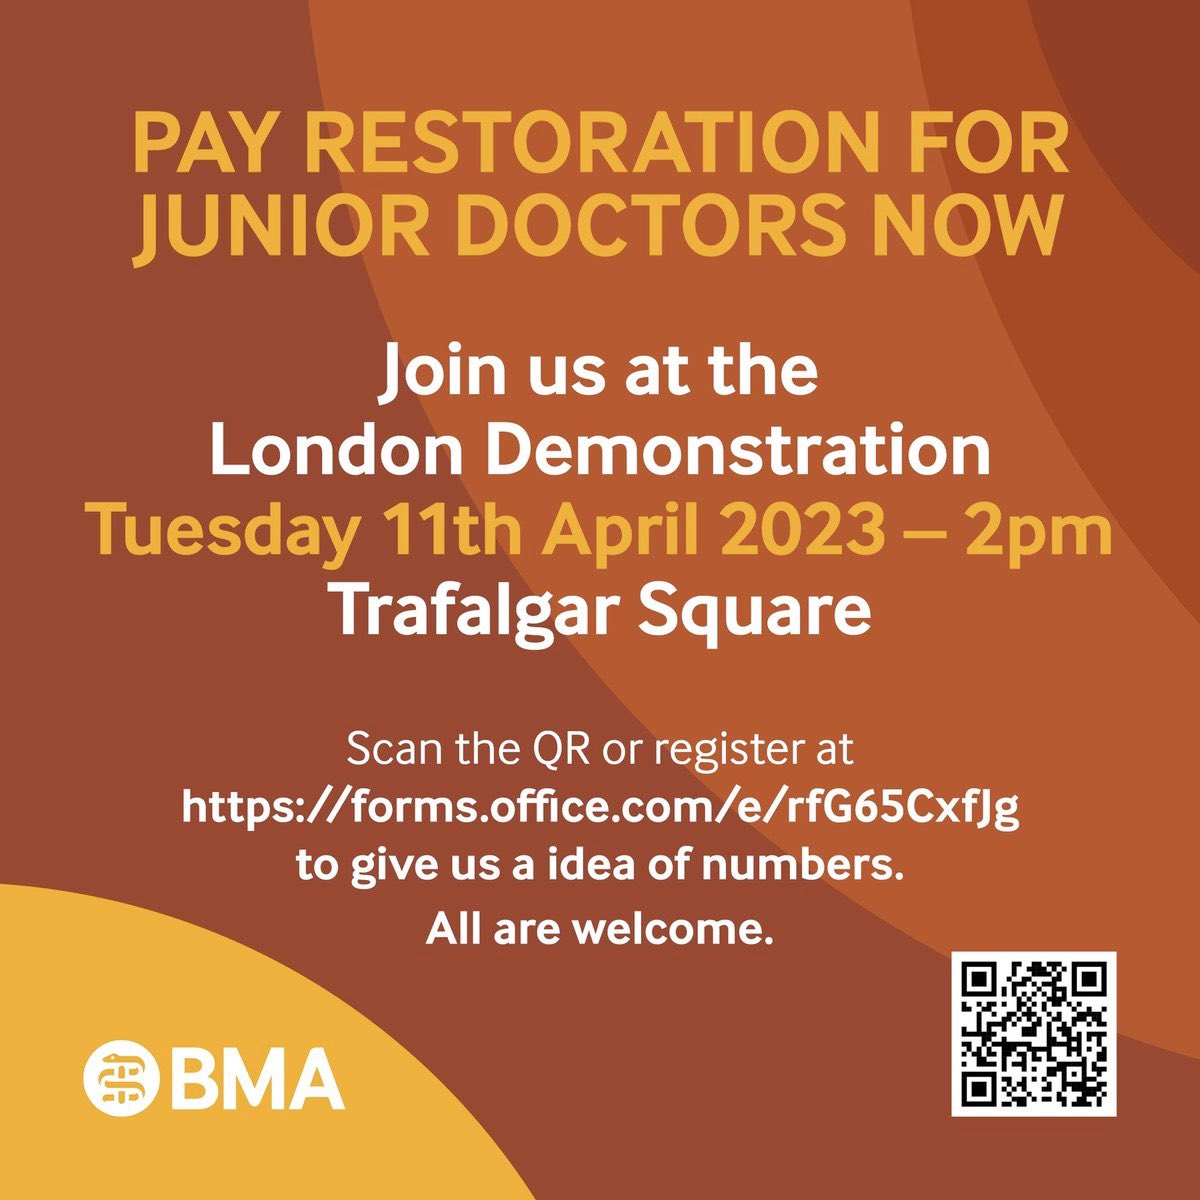 I will be supporting my local junior doctors as they are: 

- Highly trained

- Underpaid

They have had years of pay cuts, and it cannot continue, the NHS needs them to survive. 

#PayRestorationNow
#JuniorDoctorsStrike
@SouthernBMA